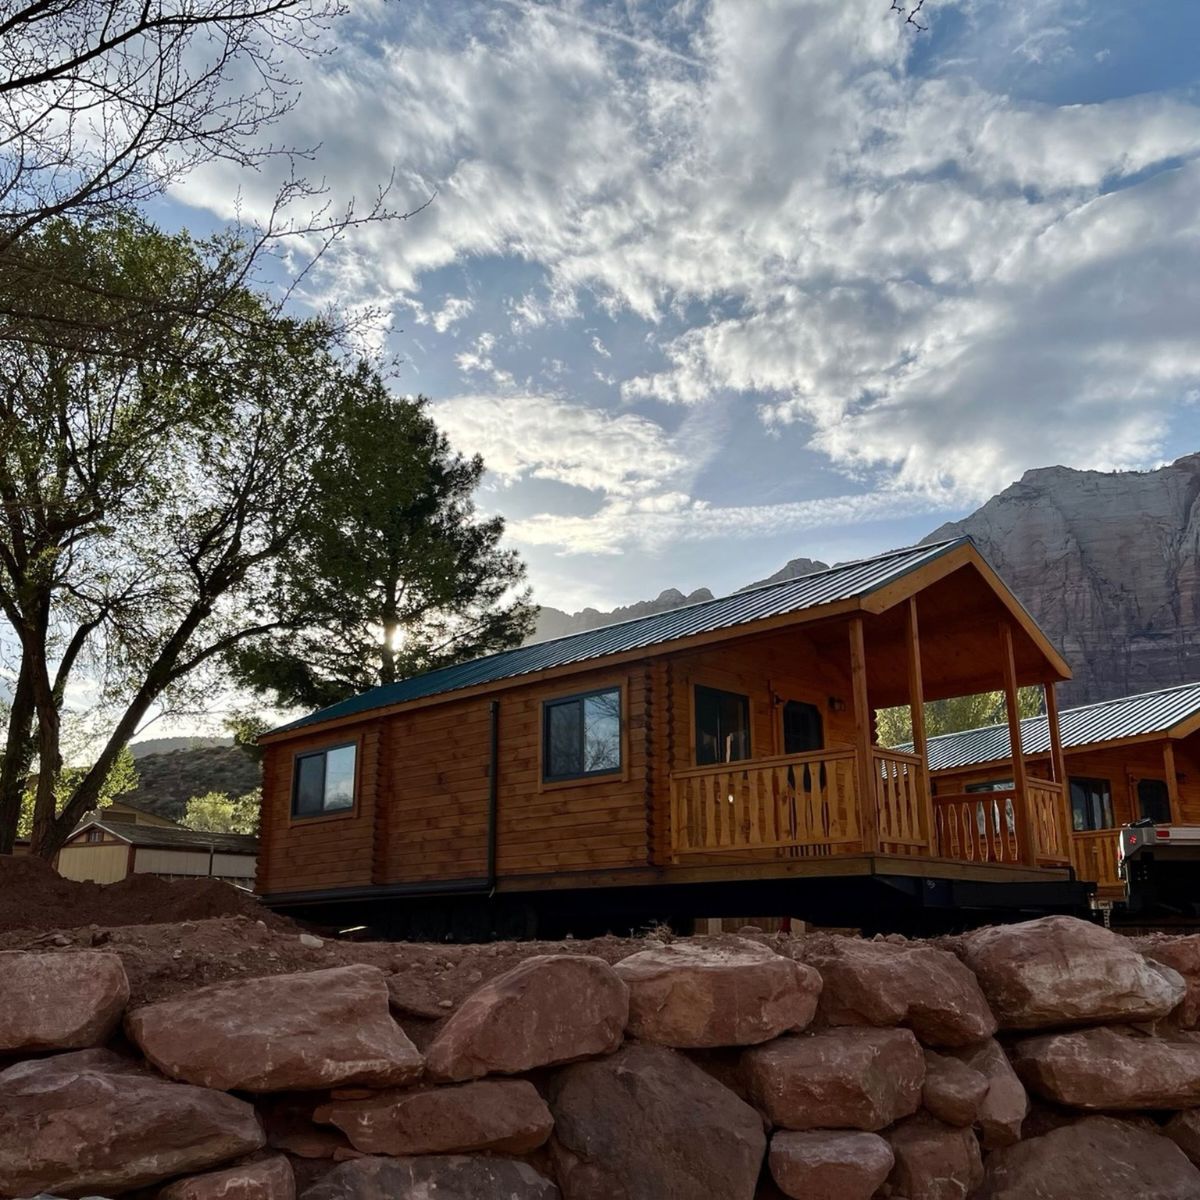 Drummy Log Cabin Features Traditional Square Chinked Logs